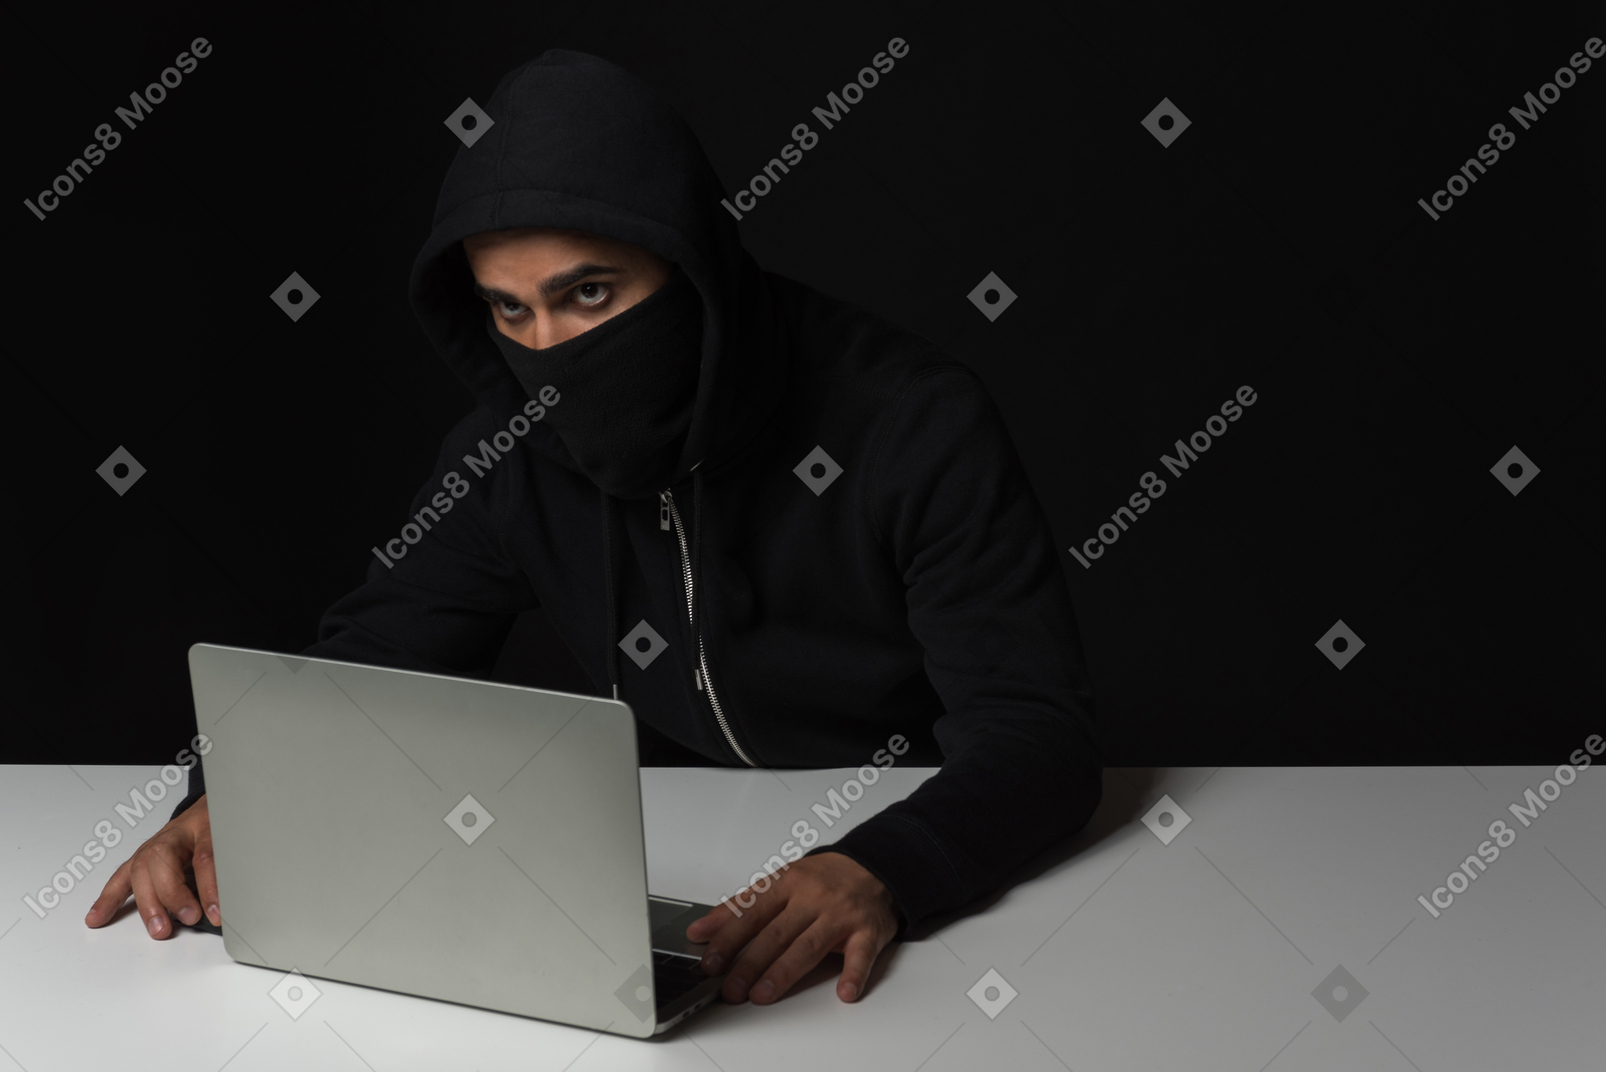 Hacker guy sitting at the table and working on laptop in the dark